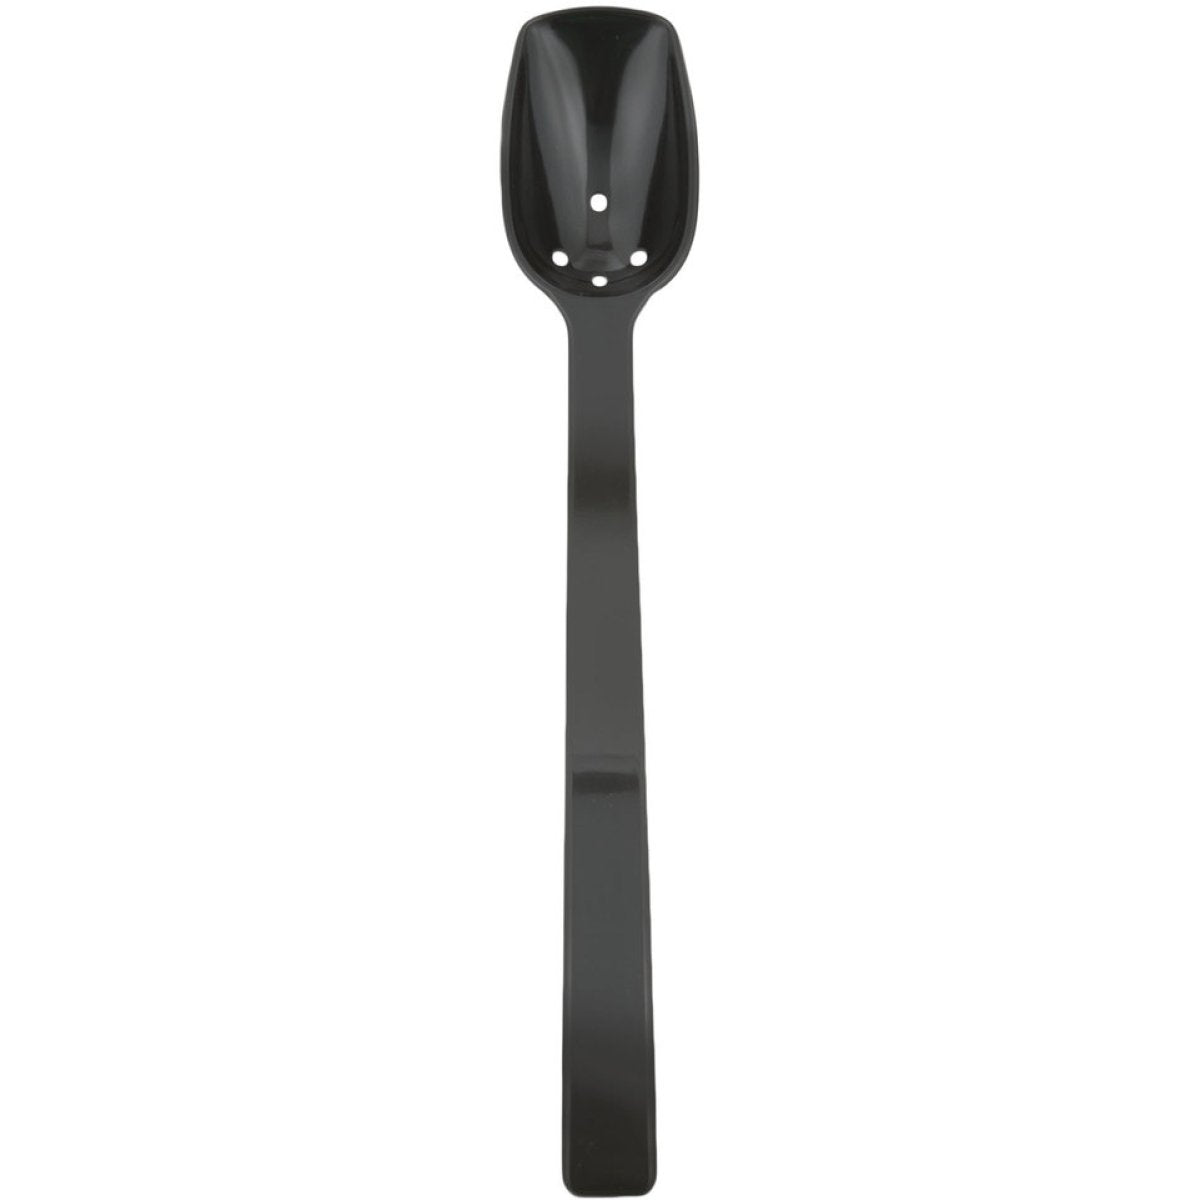 0.75oz Catering Perforated Serving Spoon 10" Handle Black Polycarbonate Rental